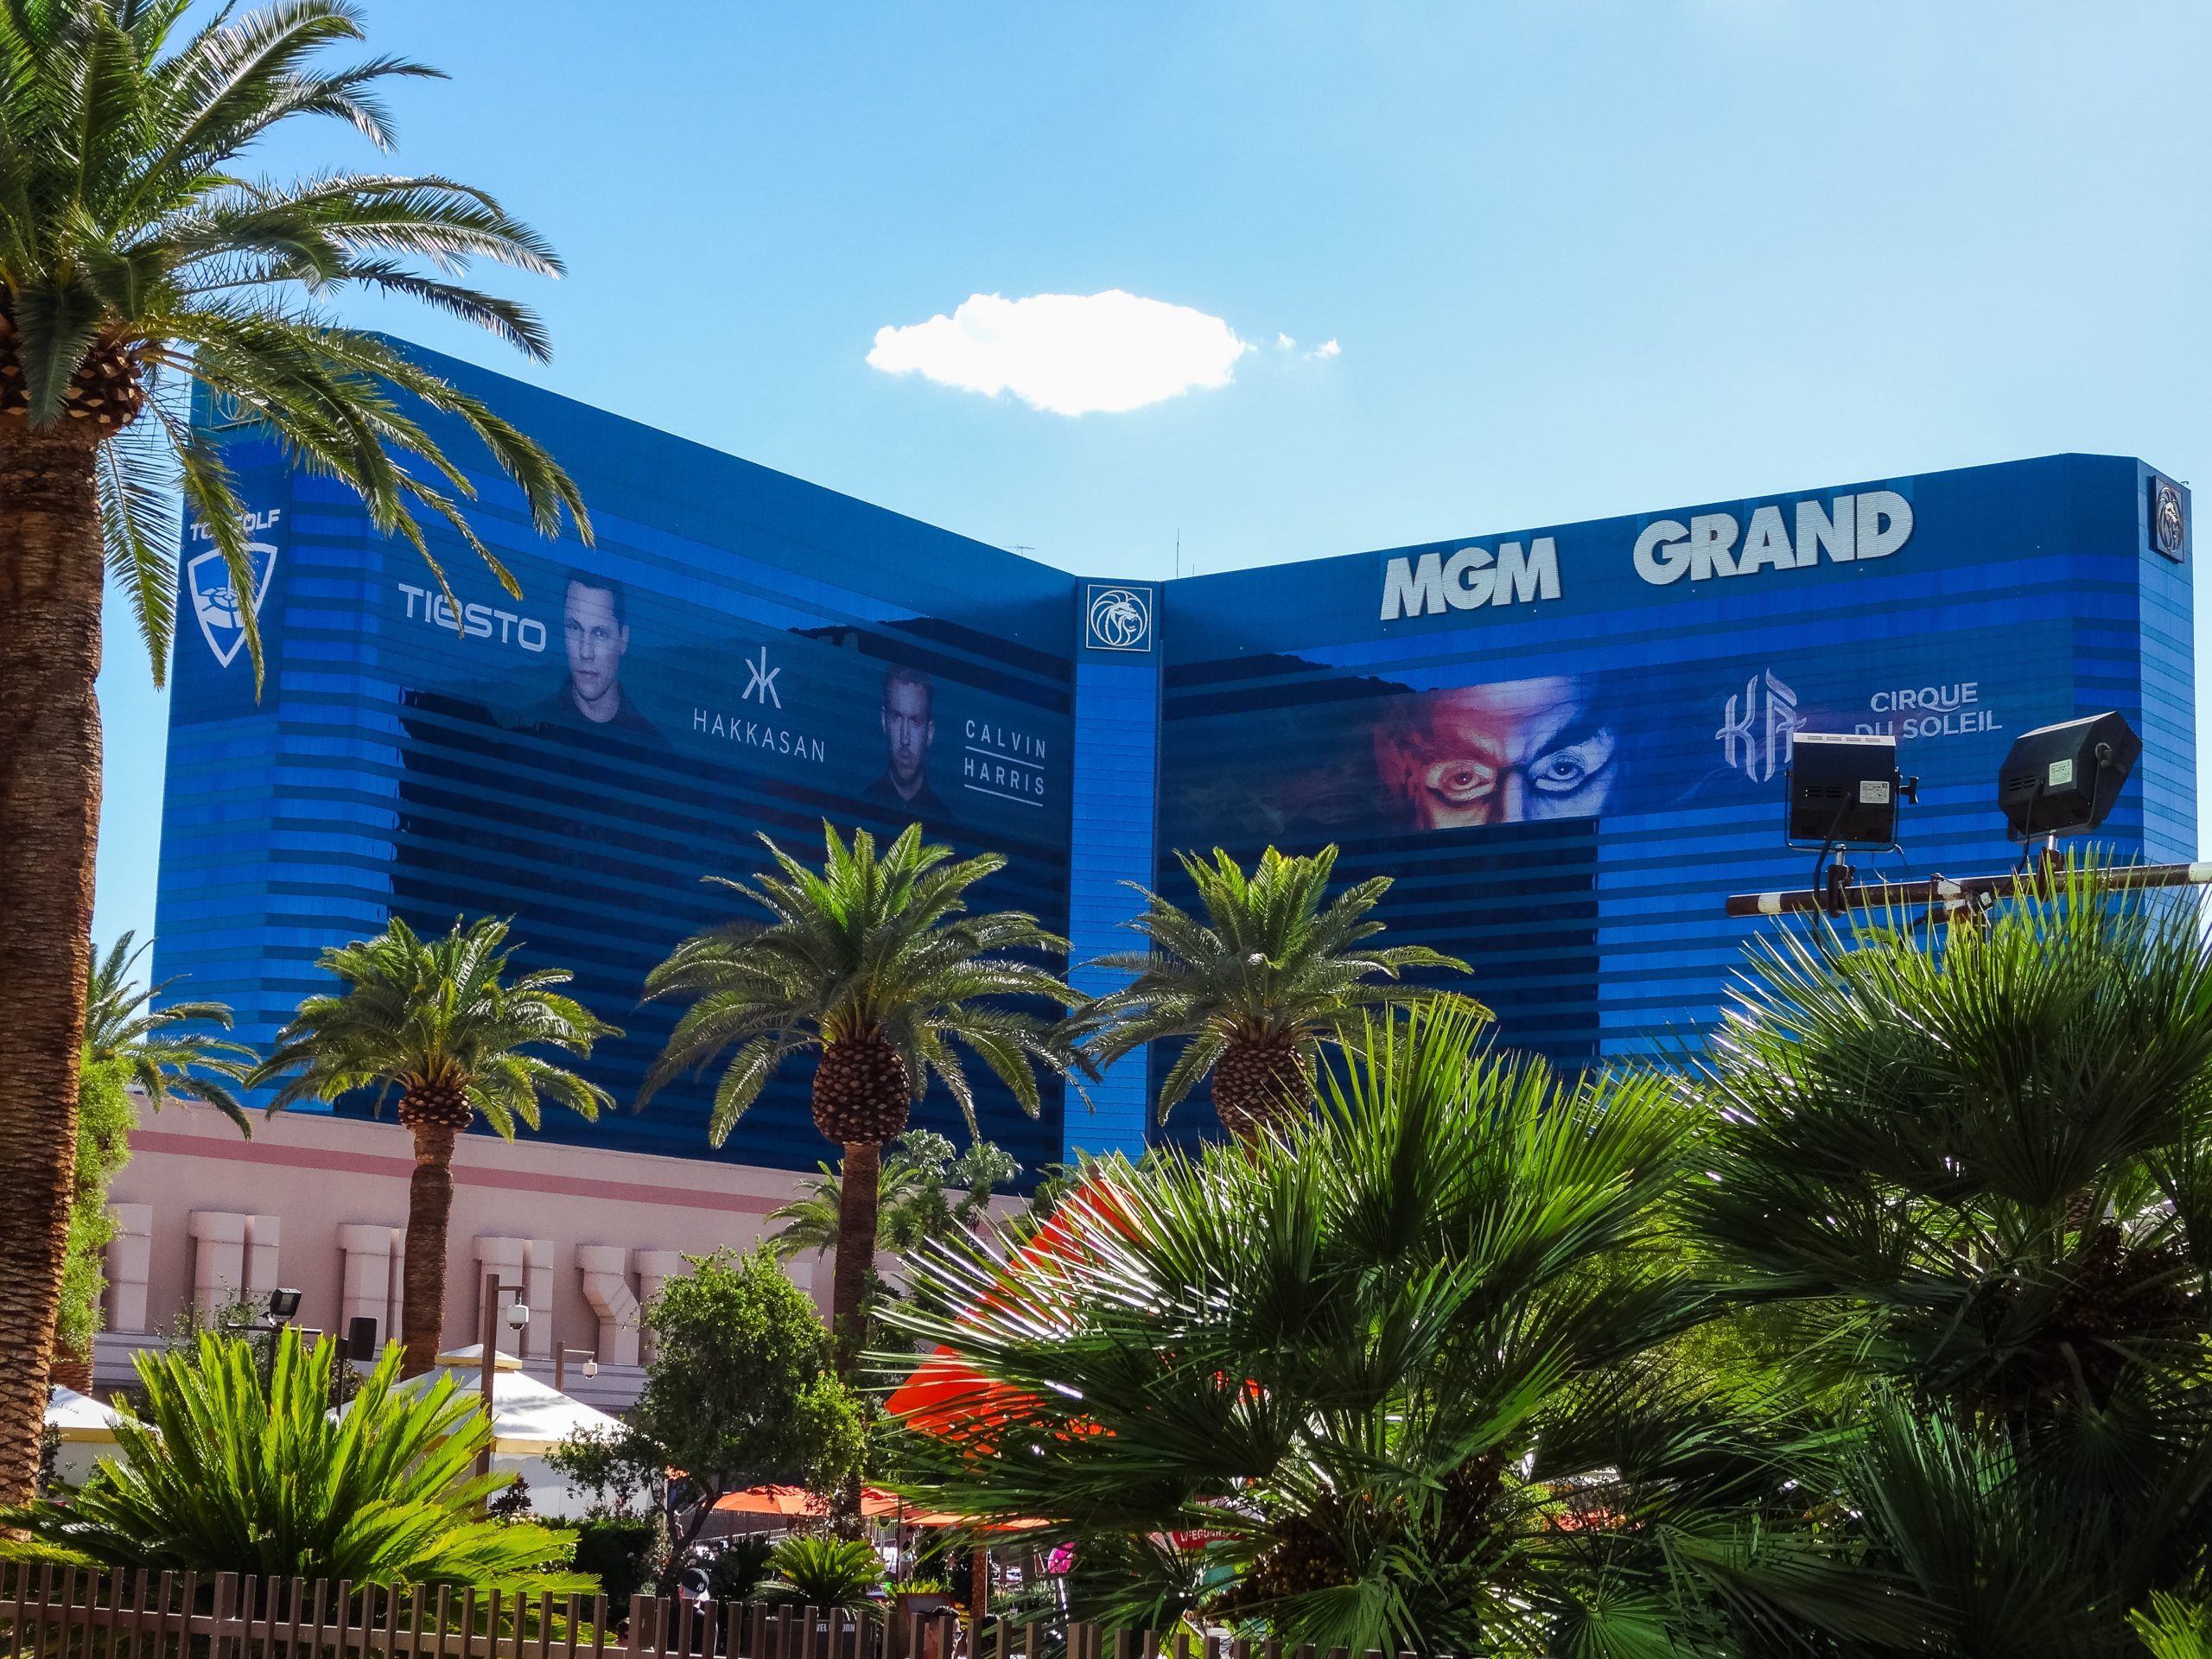 MGM Hotel Hack Leaves 10.6M Guests’ Personal Data Exposed